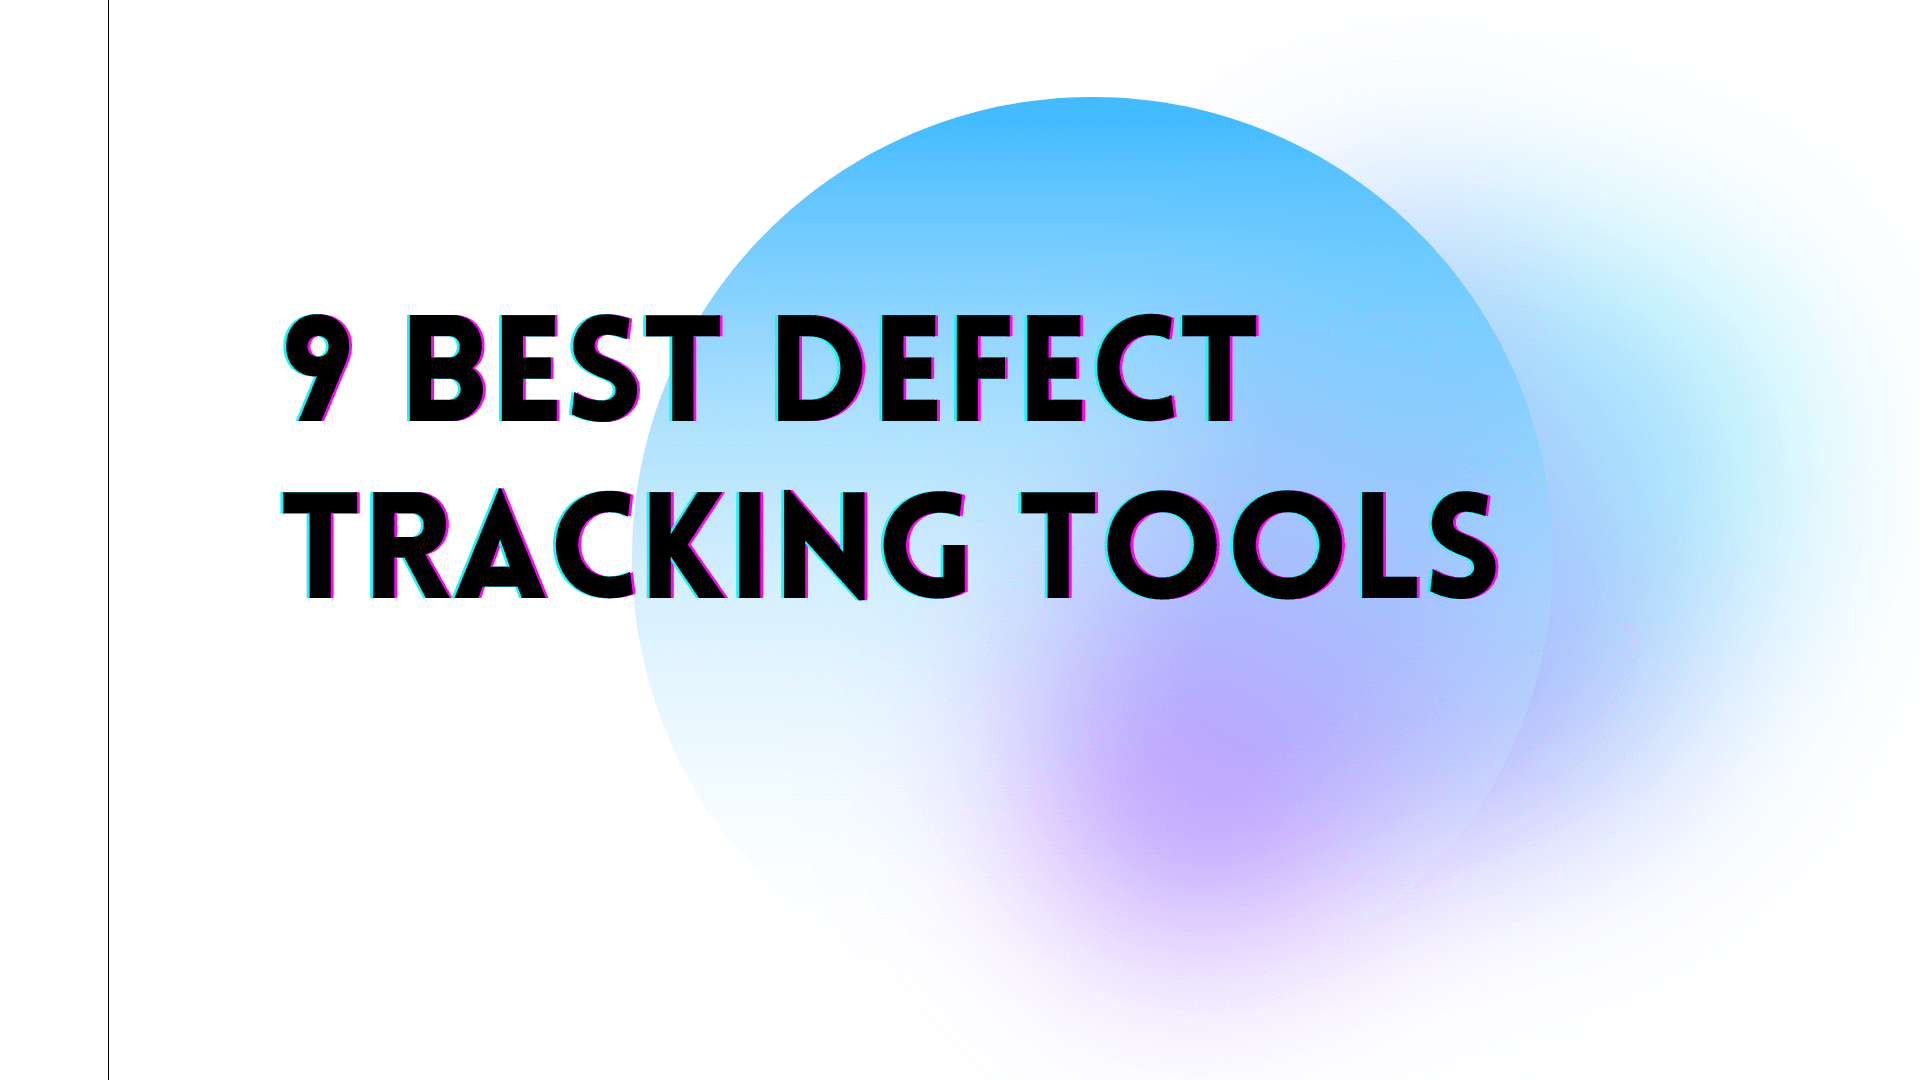 9 Best Defect Tracking Tools in 2022 cover